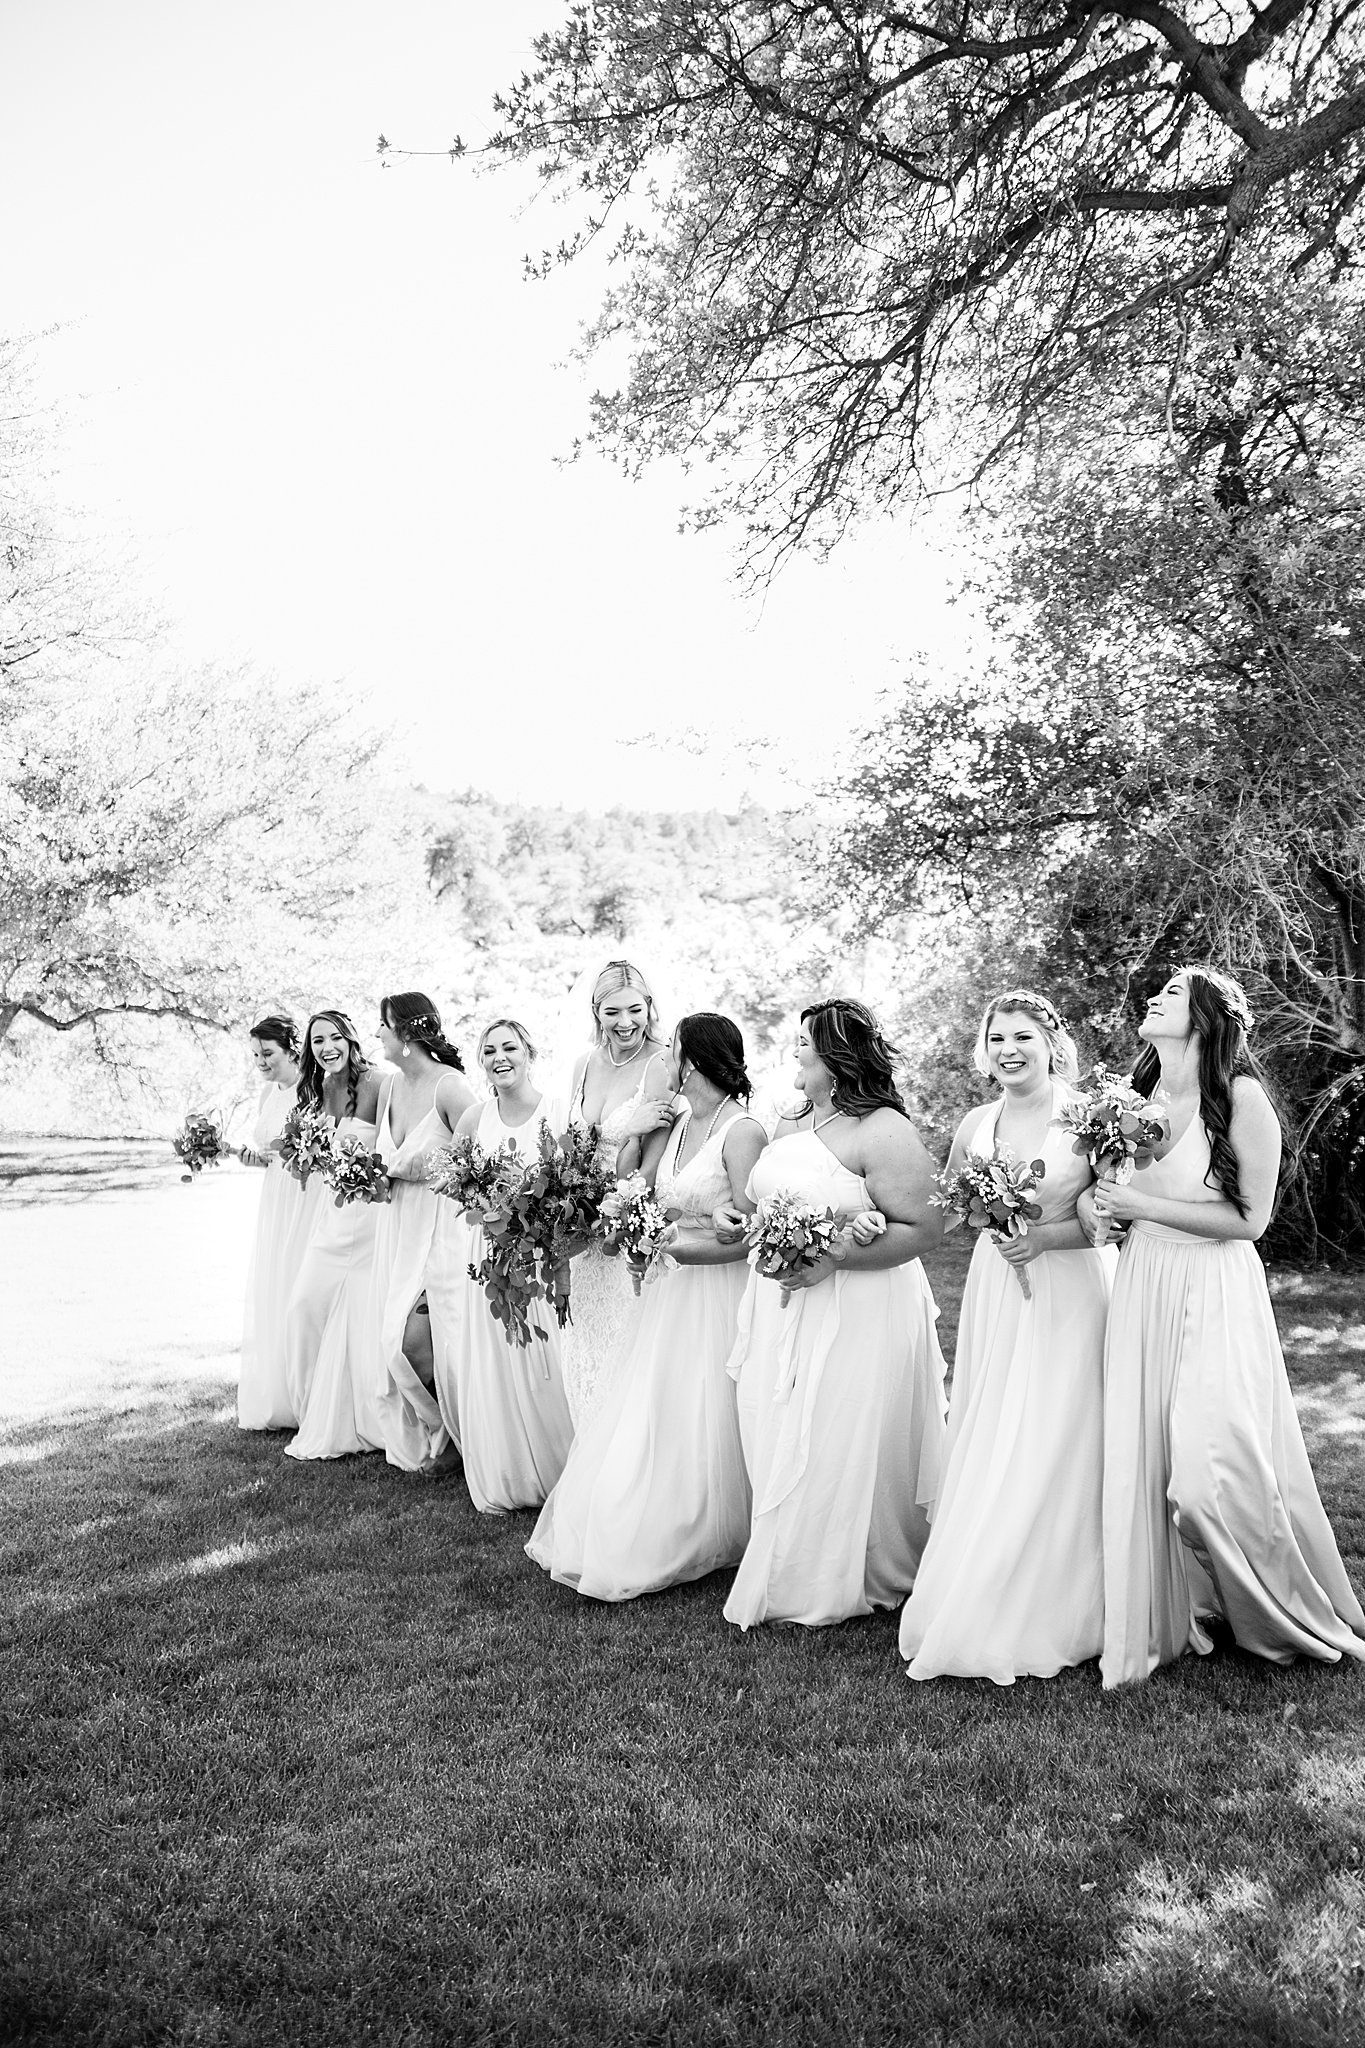 Bride and bridesmaids laughing together at Van Dickson Ranch wedding by Skull Valley wedding photographer PMA Photography.